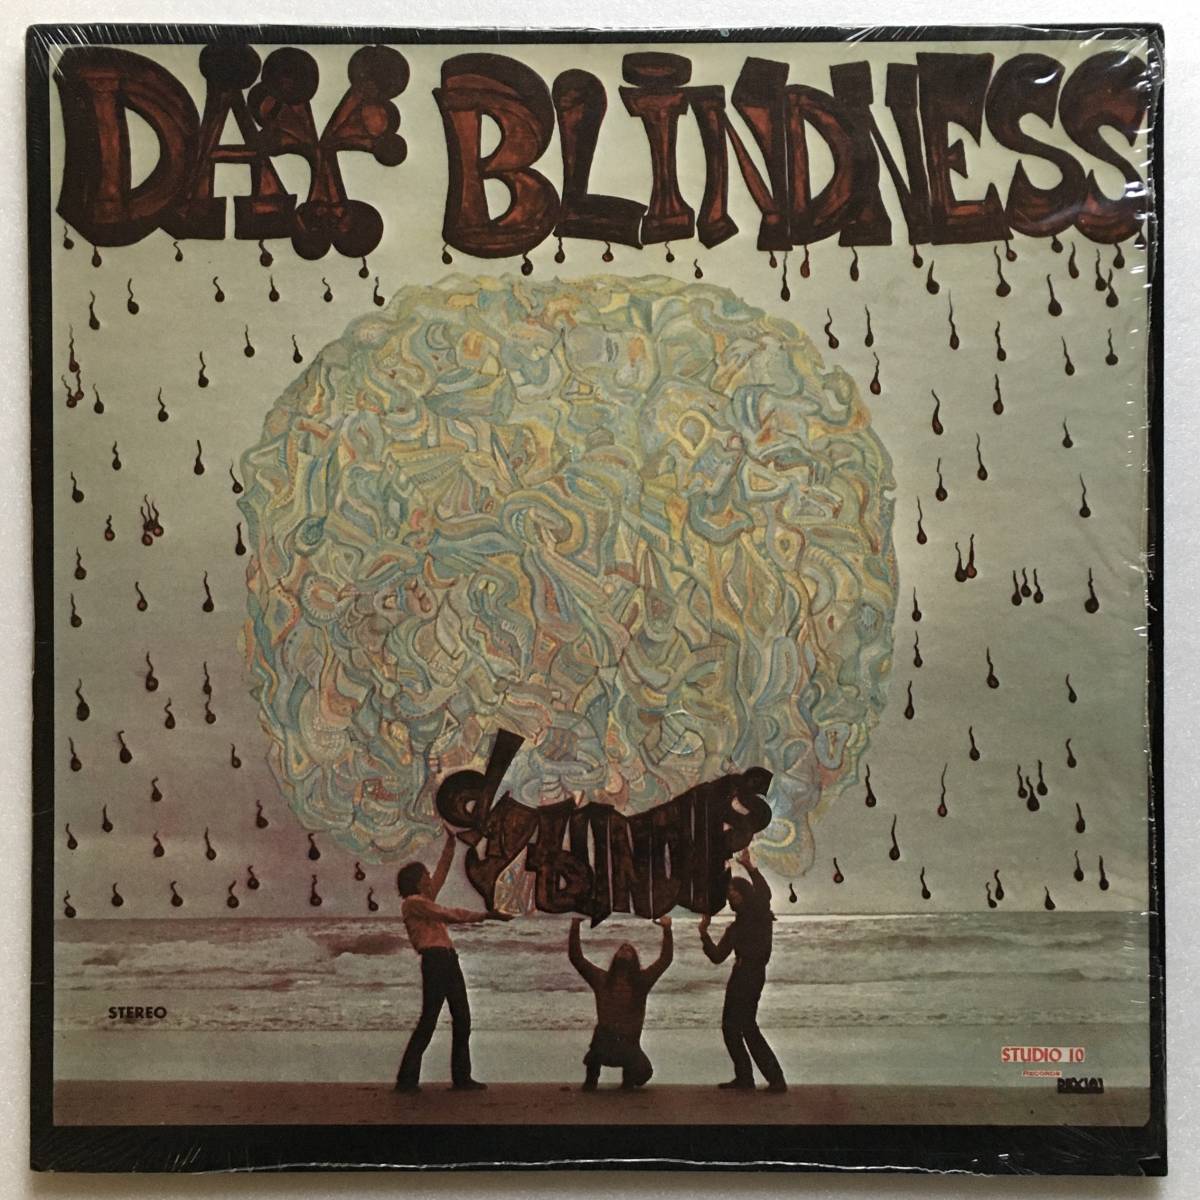 DAY BLINDNESS「DAY BLINDNESS」US ORIGINAL STUDIO 10 DBX 101 '69 RARE US PSYCHEDELIC ROCK with OPENED SHRINKWRAP_画像1